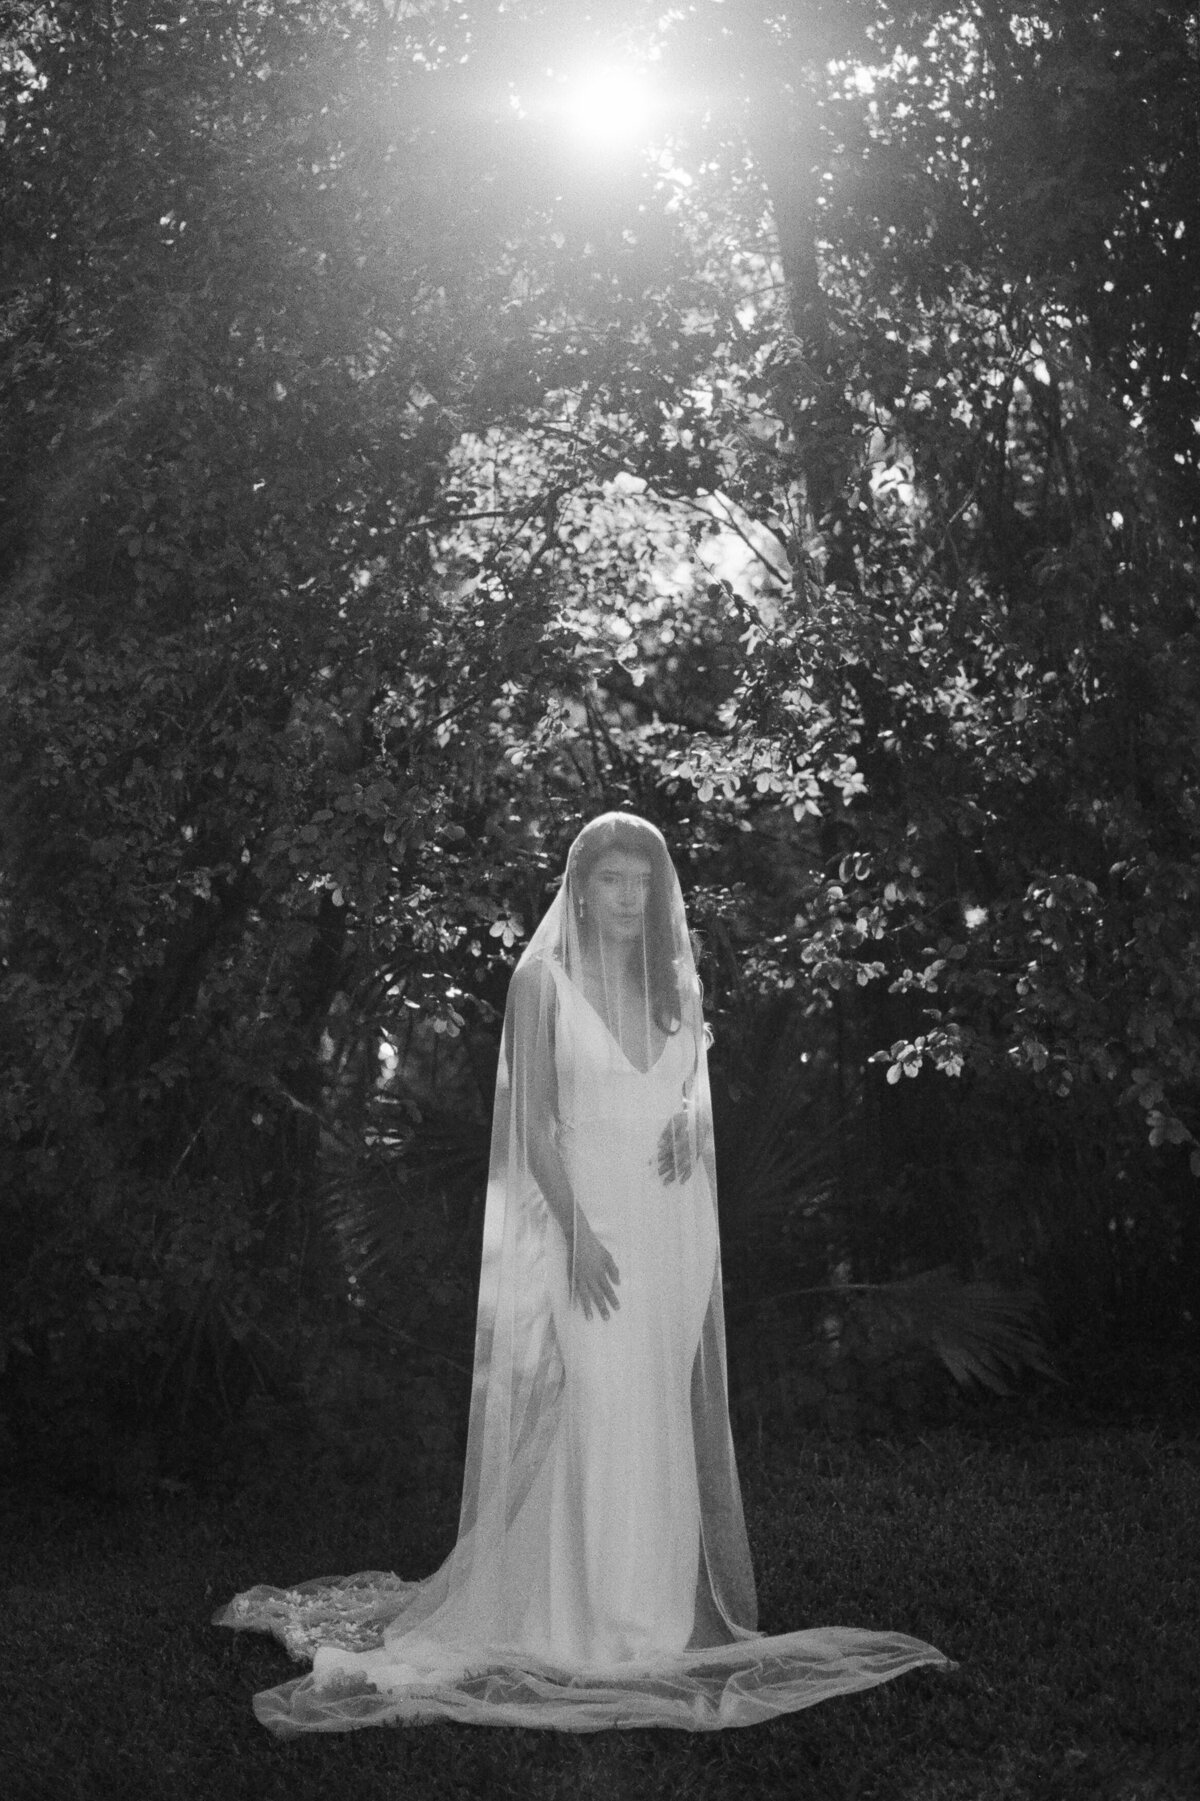 Bride covered by veil standing in froont of tress black and white